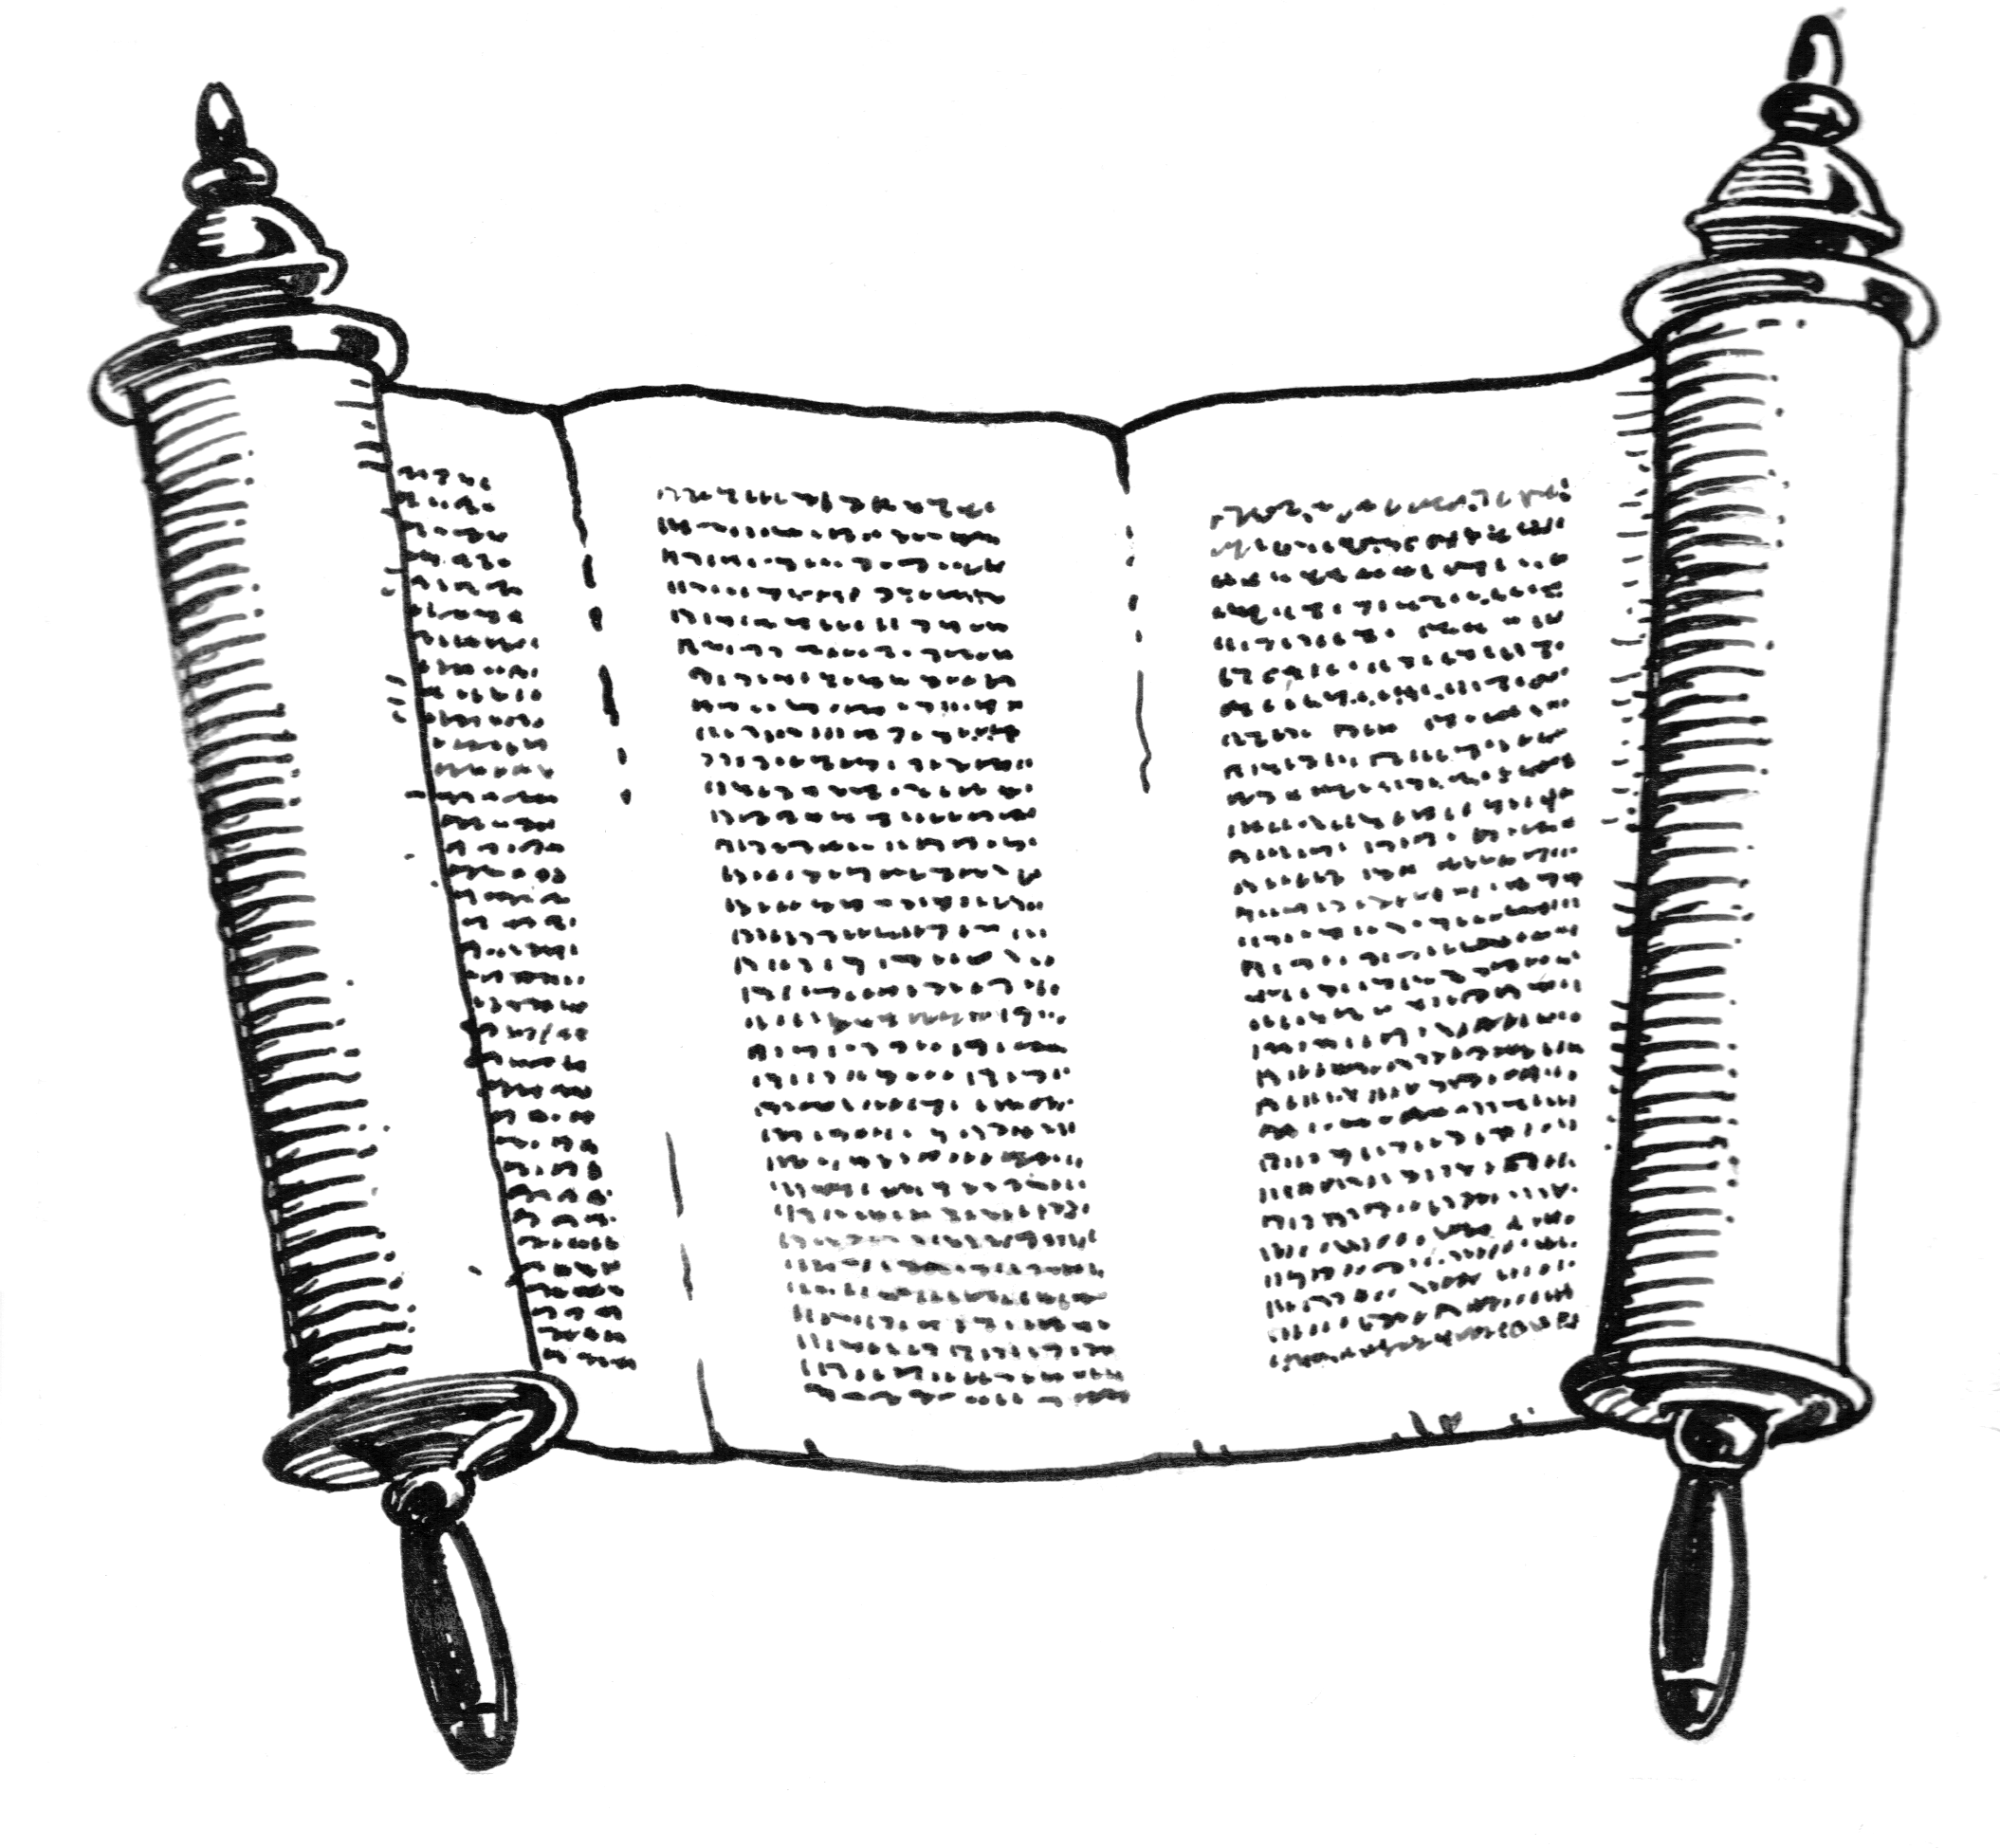 File:PSF-scroll - Wikimedia Commons